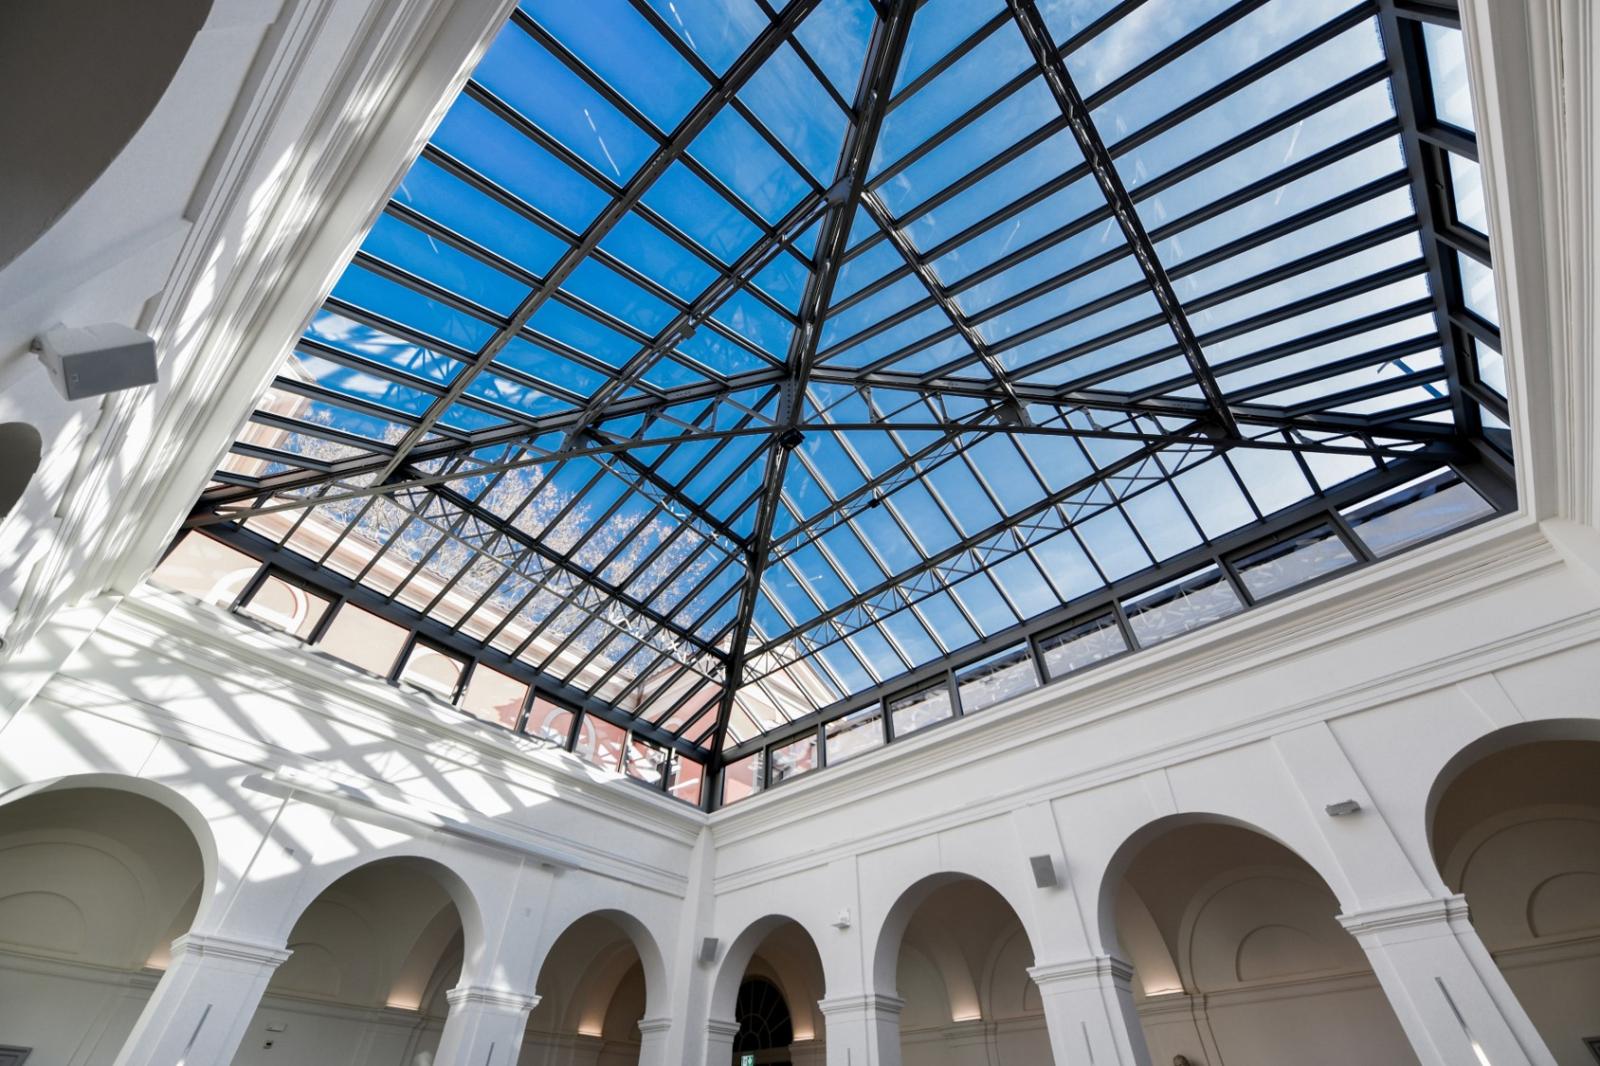 The restored skylight maintains the original iron structure.